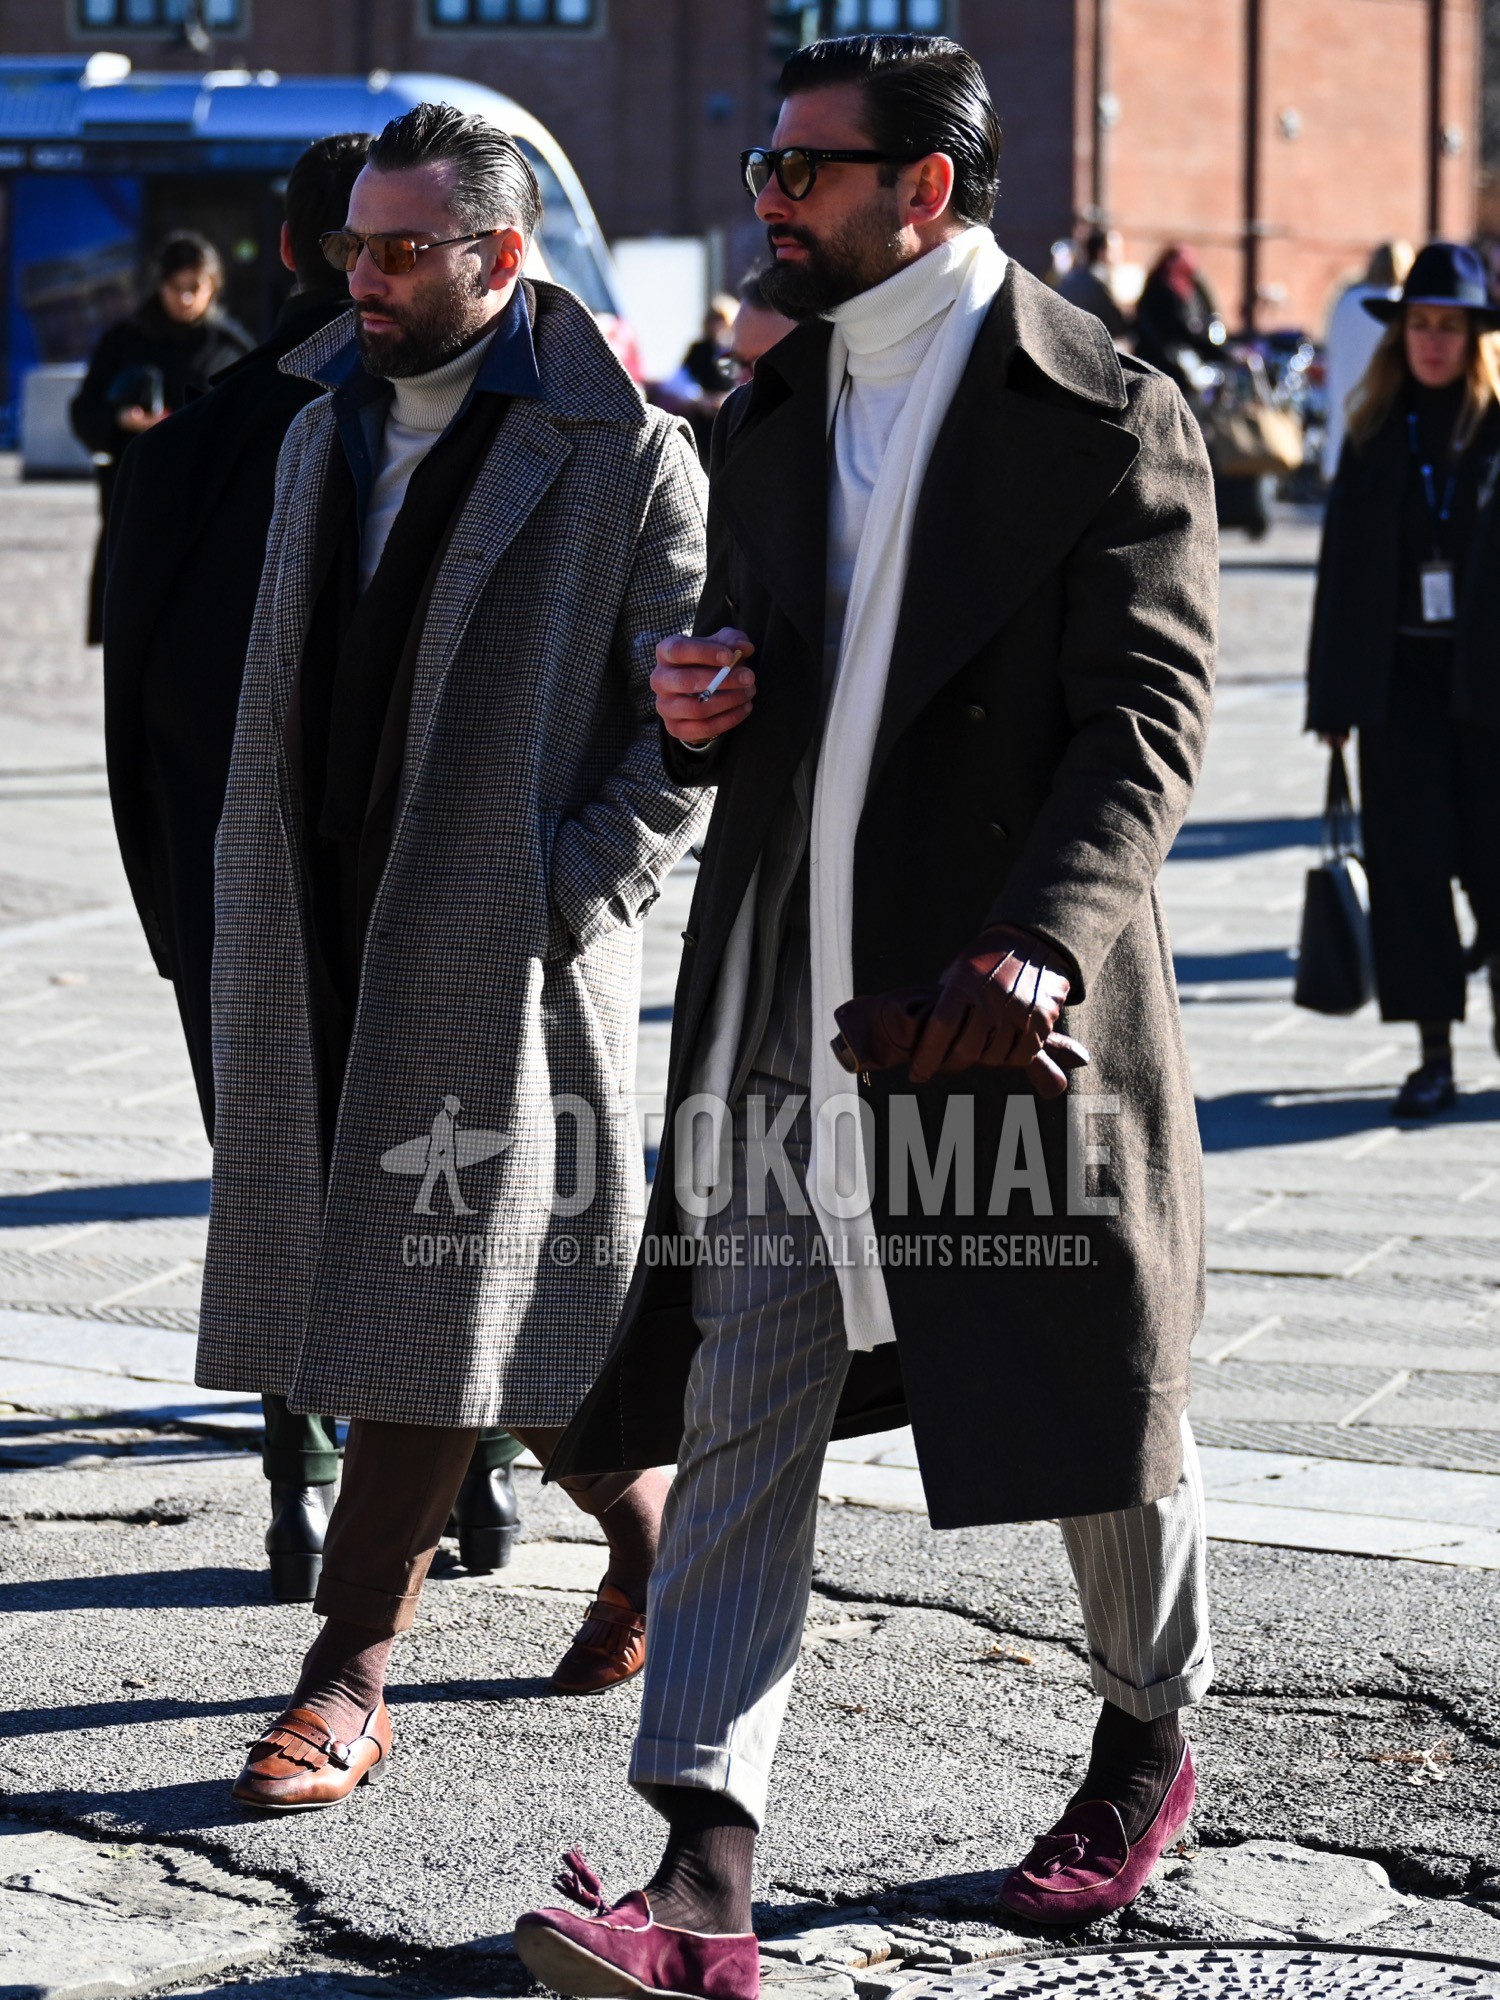 Men's autumn winter outfit with black plain sunglasses, white plain scarf, dark gray plain trench coat, white plain turtleneck knit, brown plain socks, red tassel loafers leather shoes, red suede shoes leather shoes, gray stripes suit.